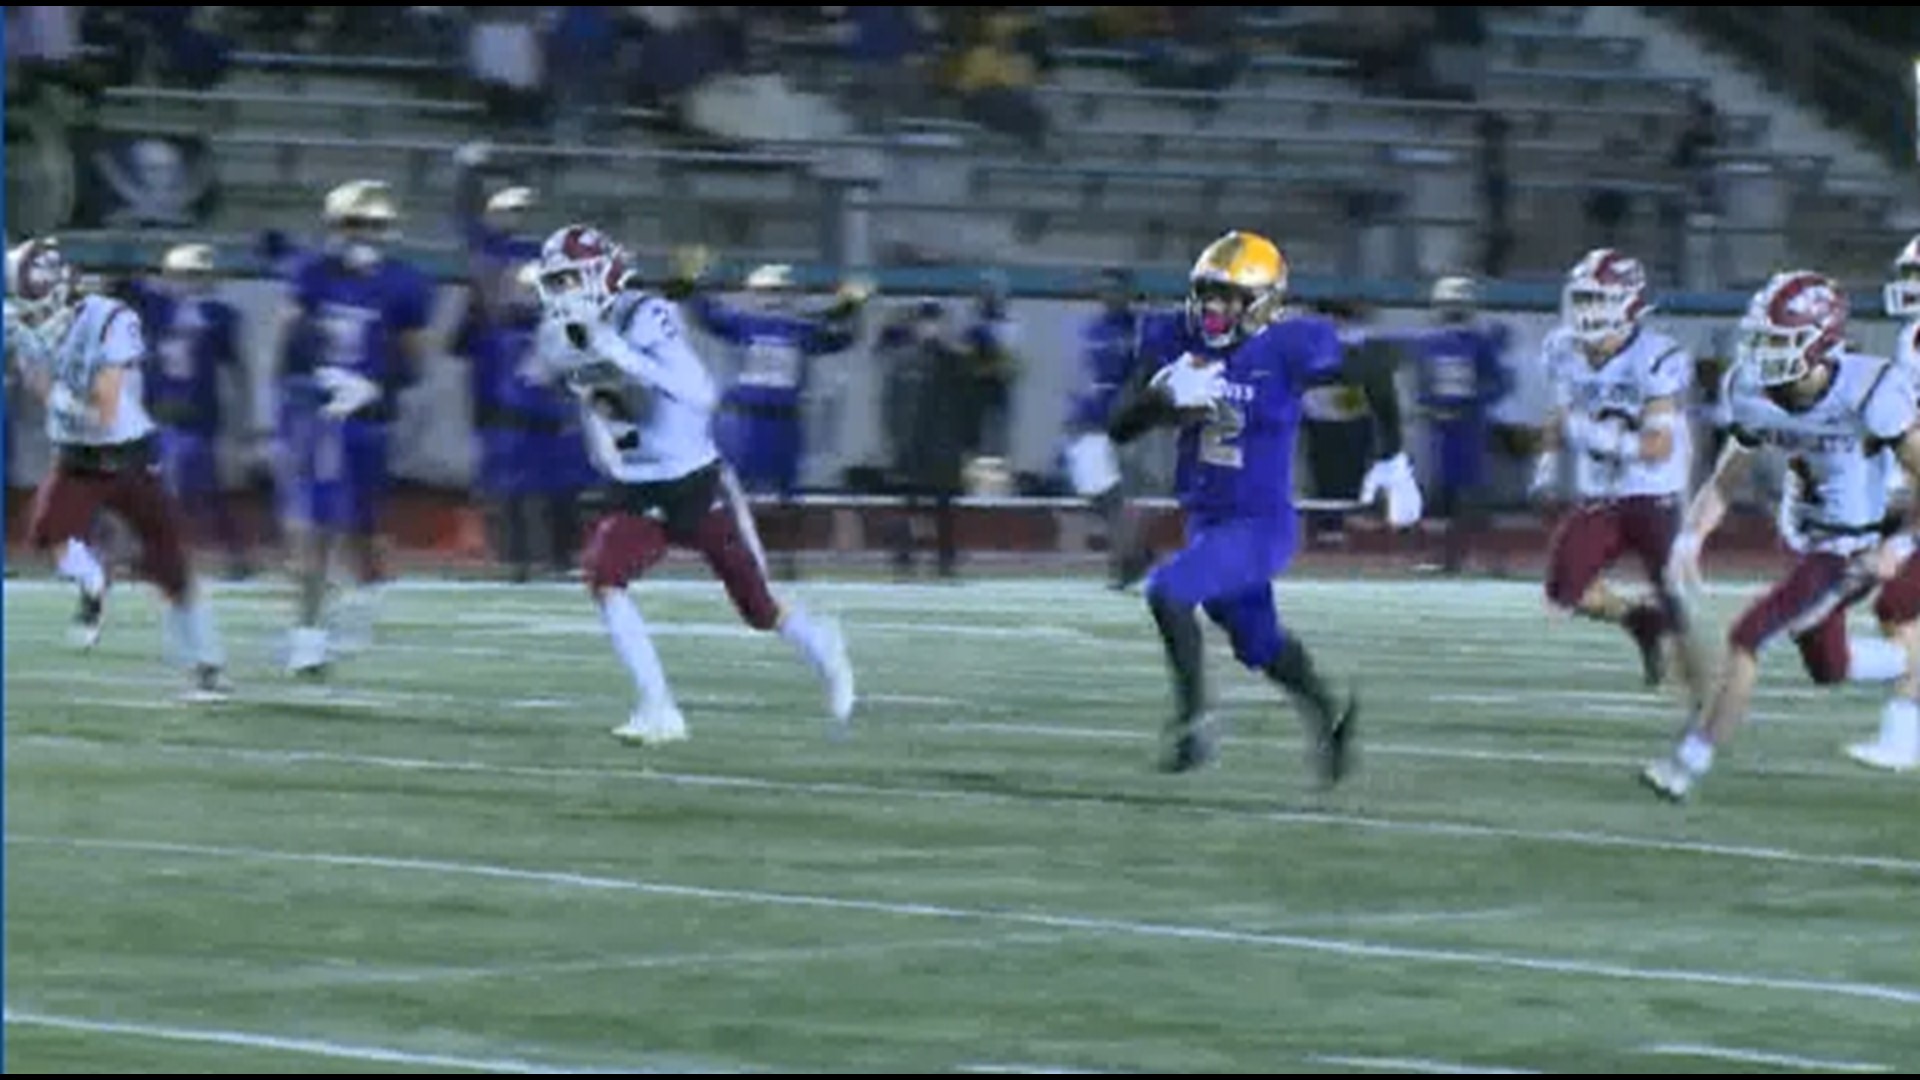 Highlights of Highline's 34-6 win over WF West in the 1st round of the State Playoffs